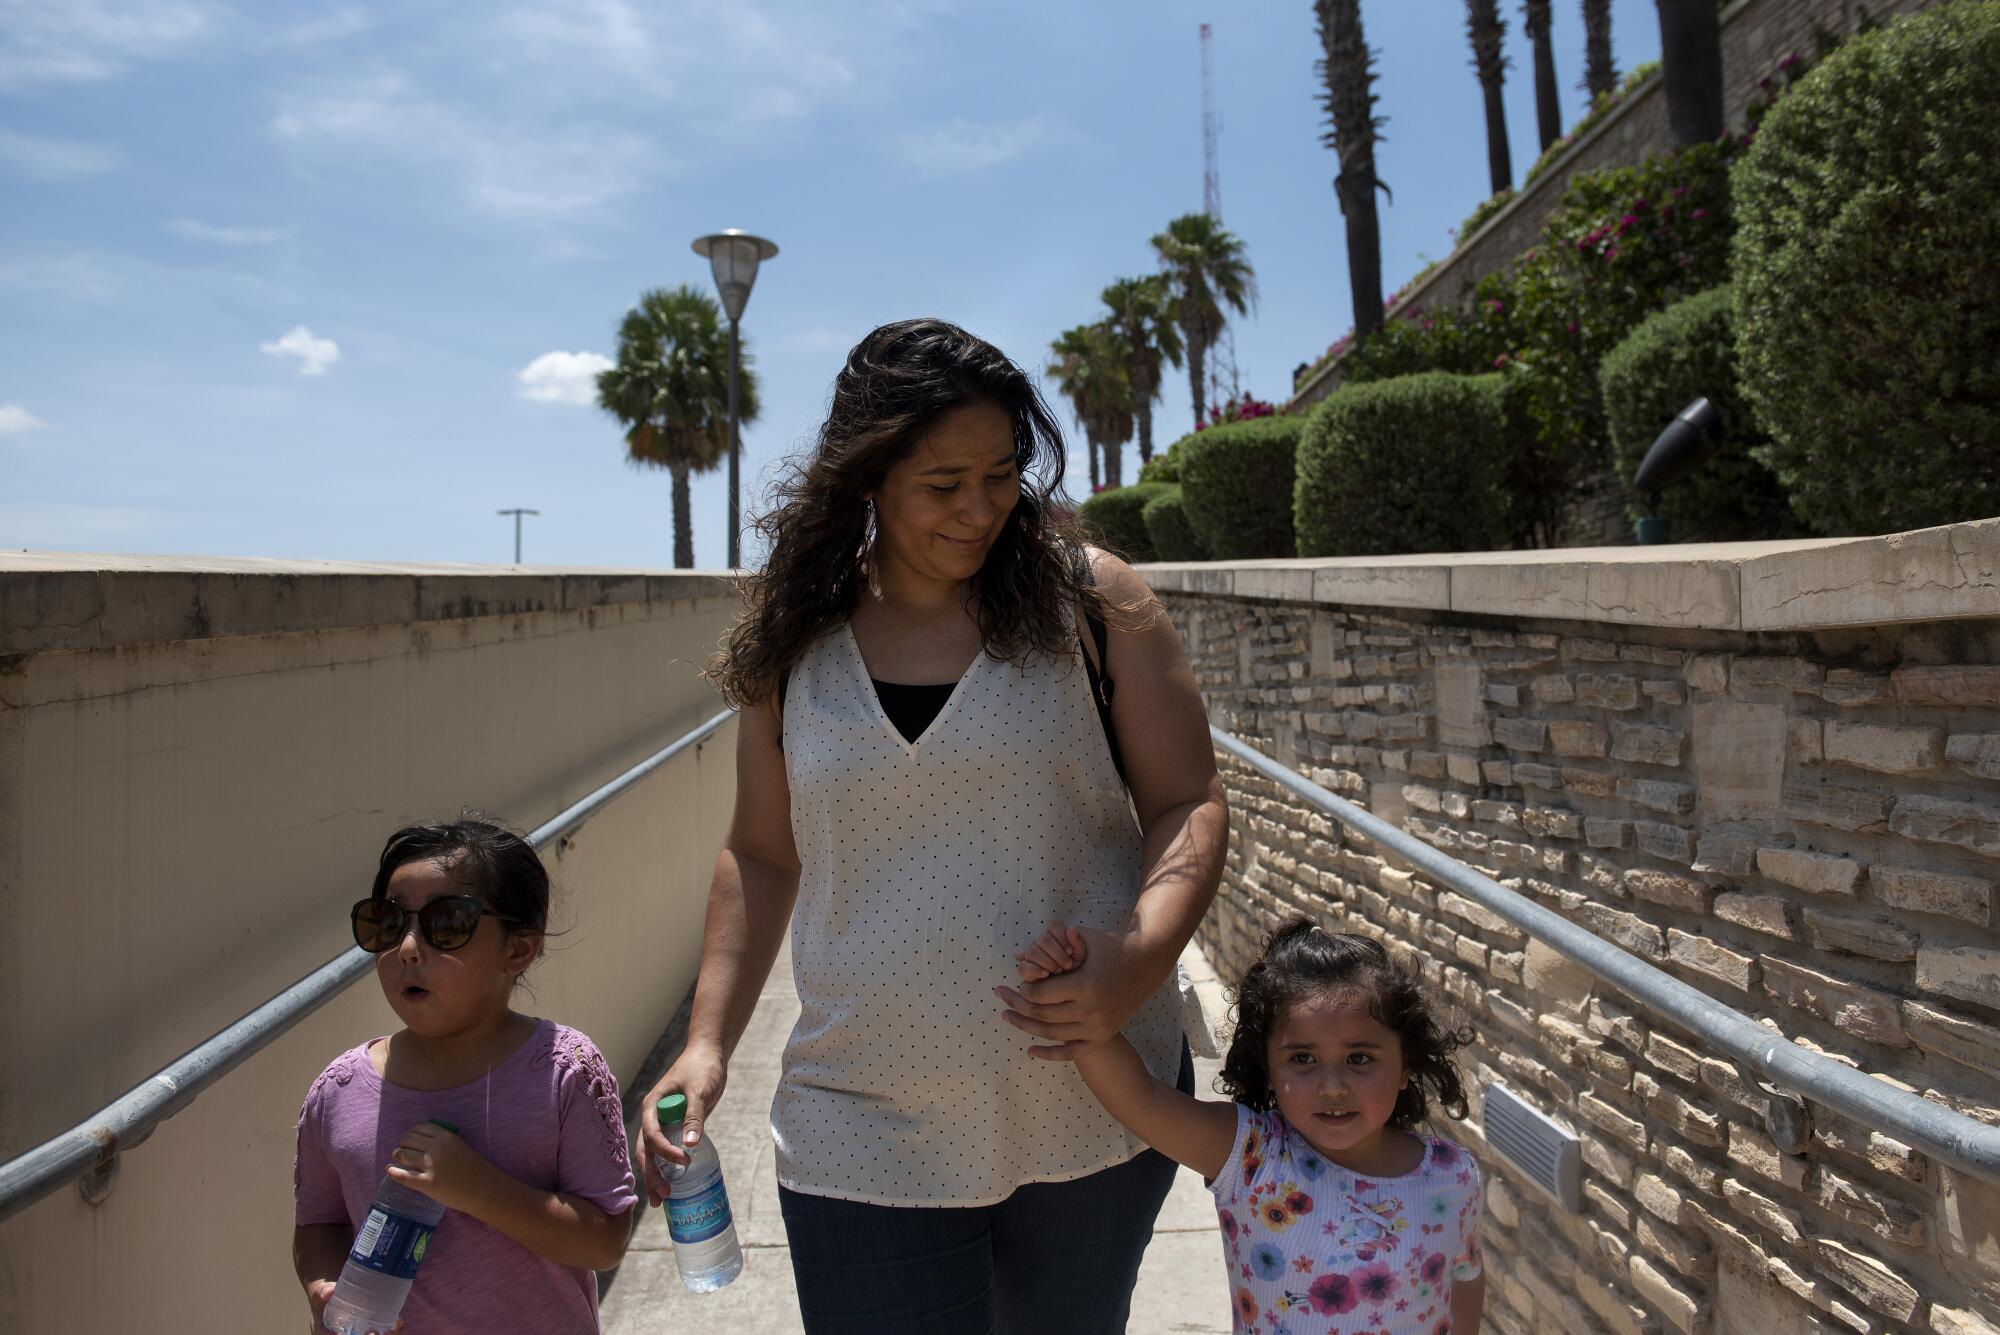 Ilse Mendez walks with her daughters Aaliyah, 5, and Aalizah, 3, at the outlet mall in Laredo, Texas.